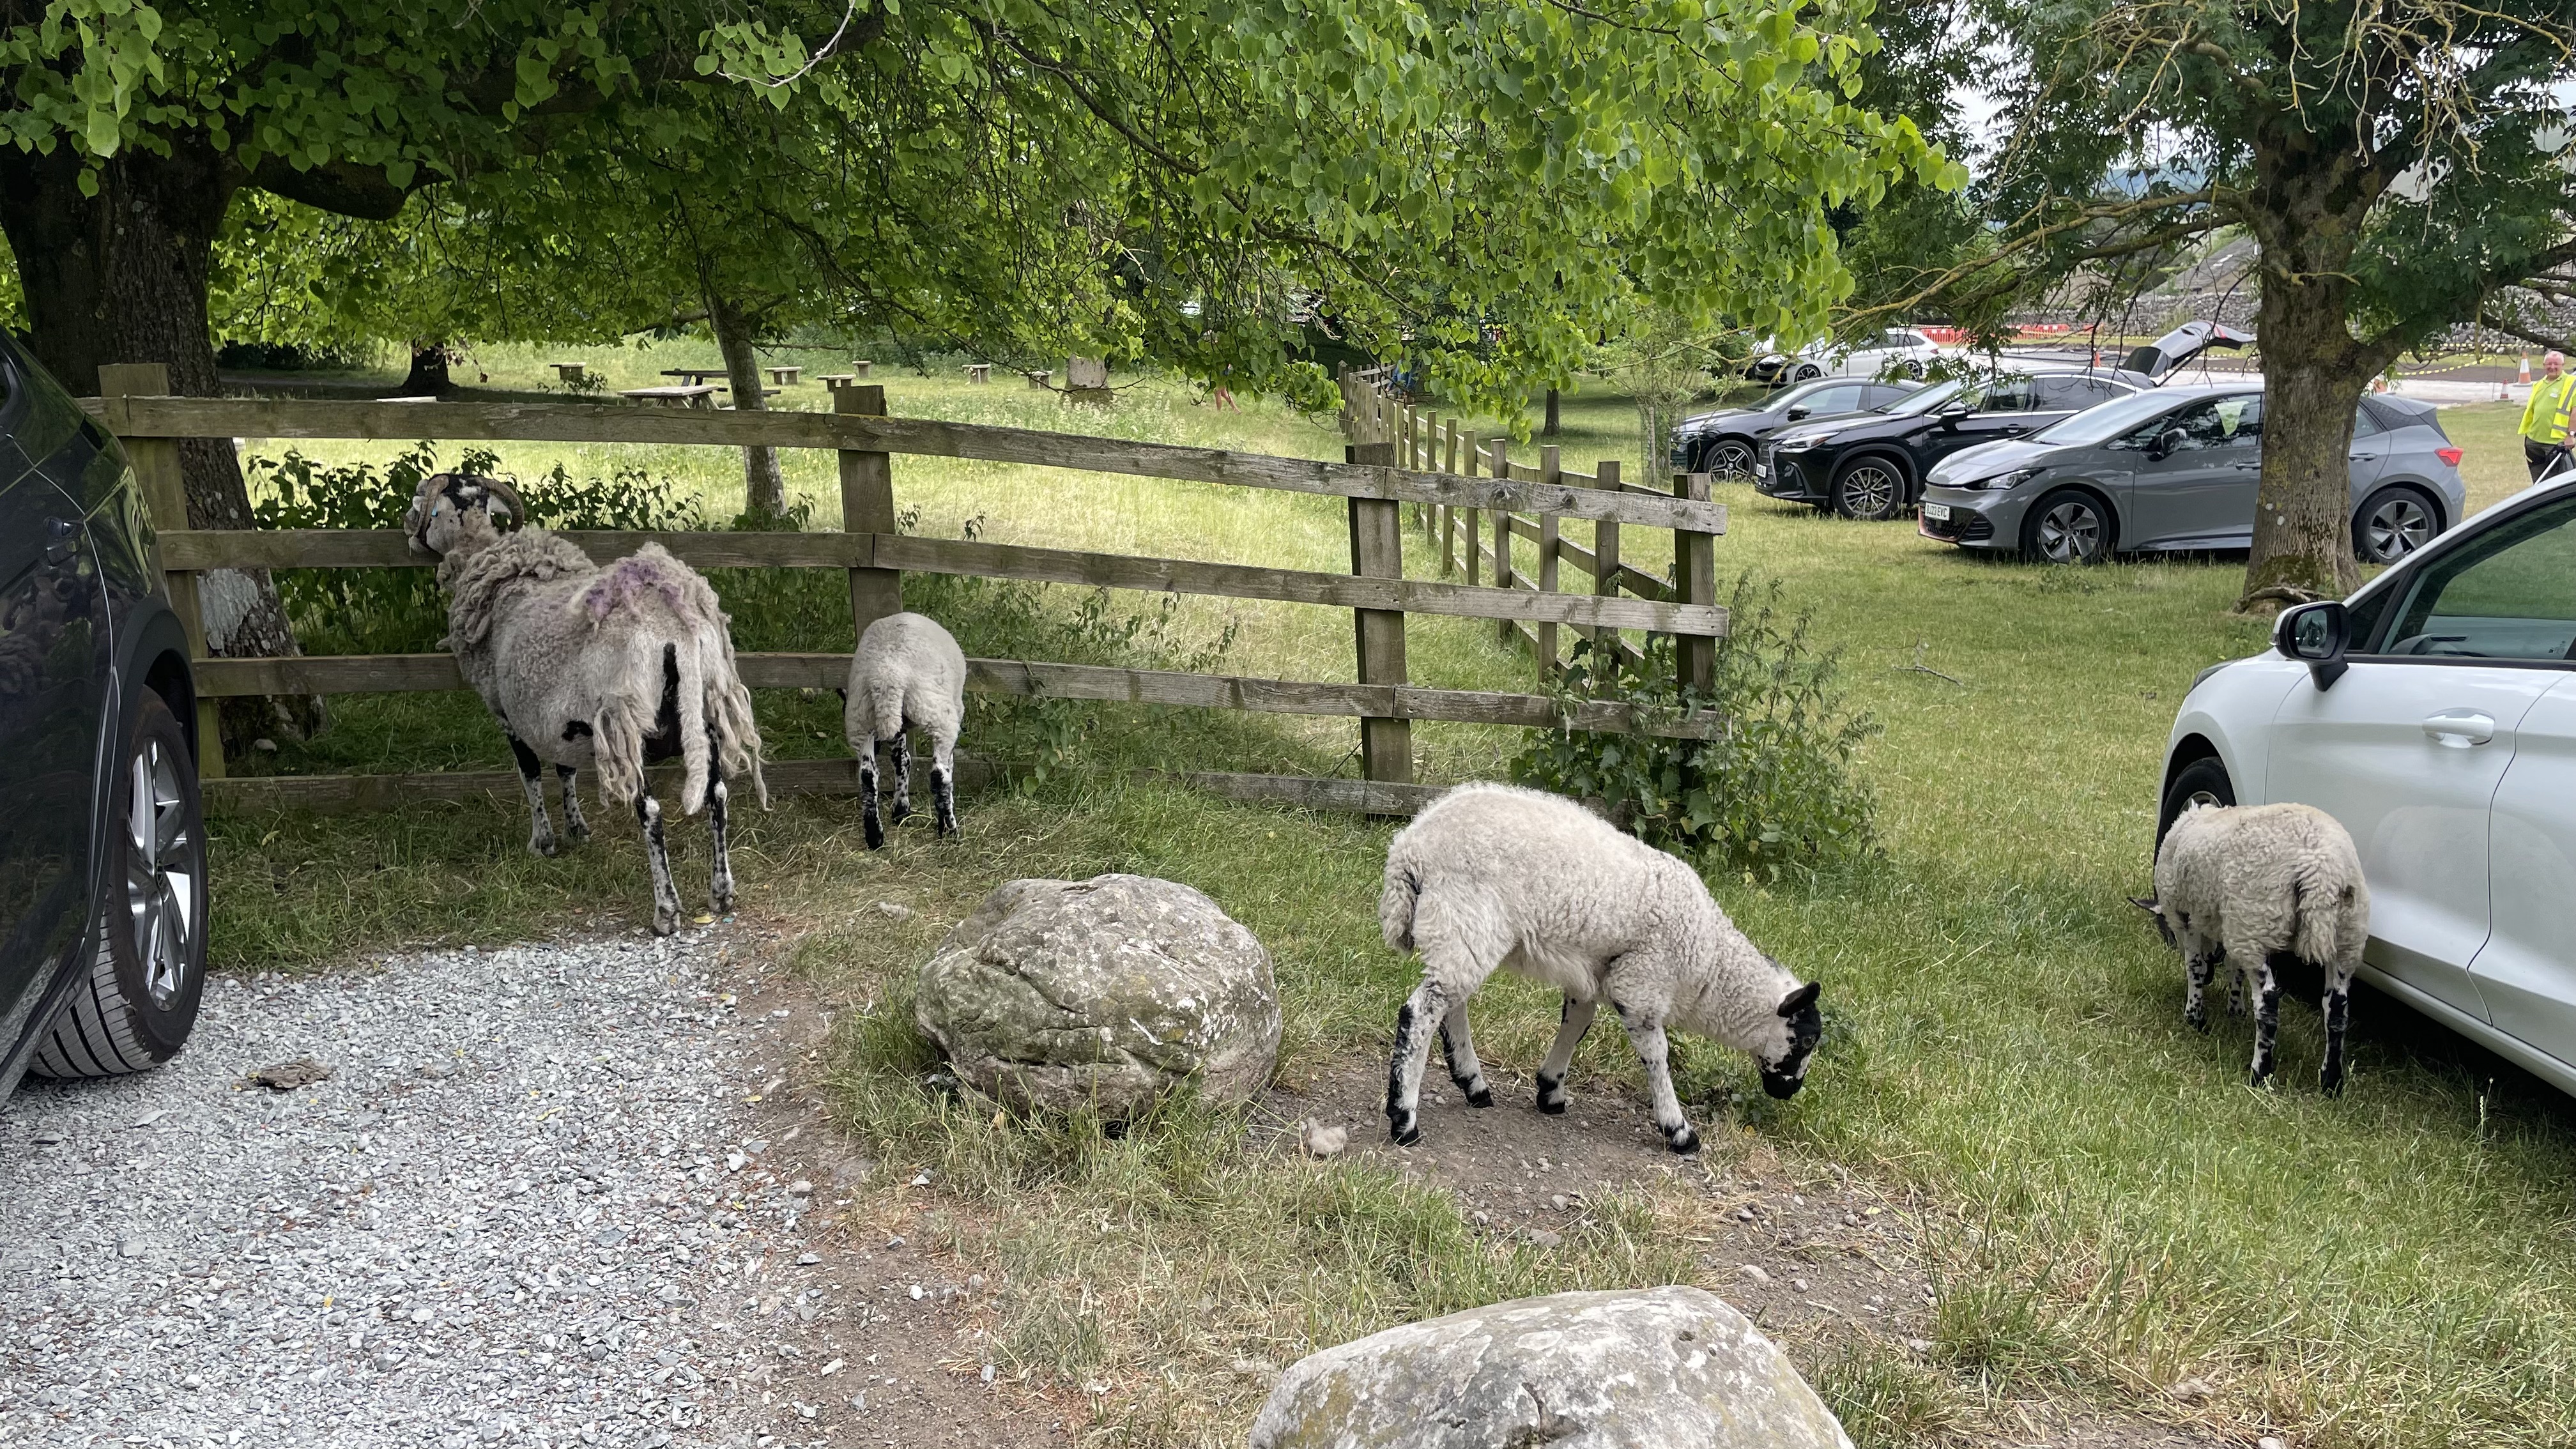 Parking with the sheep